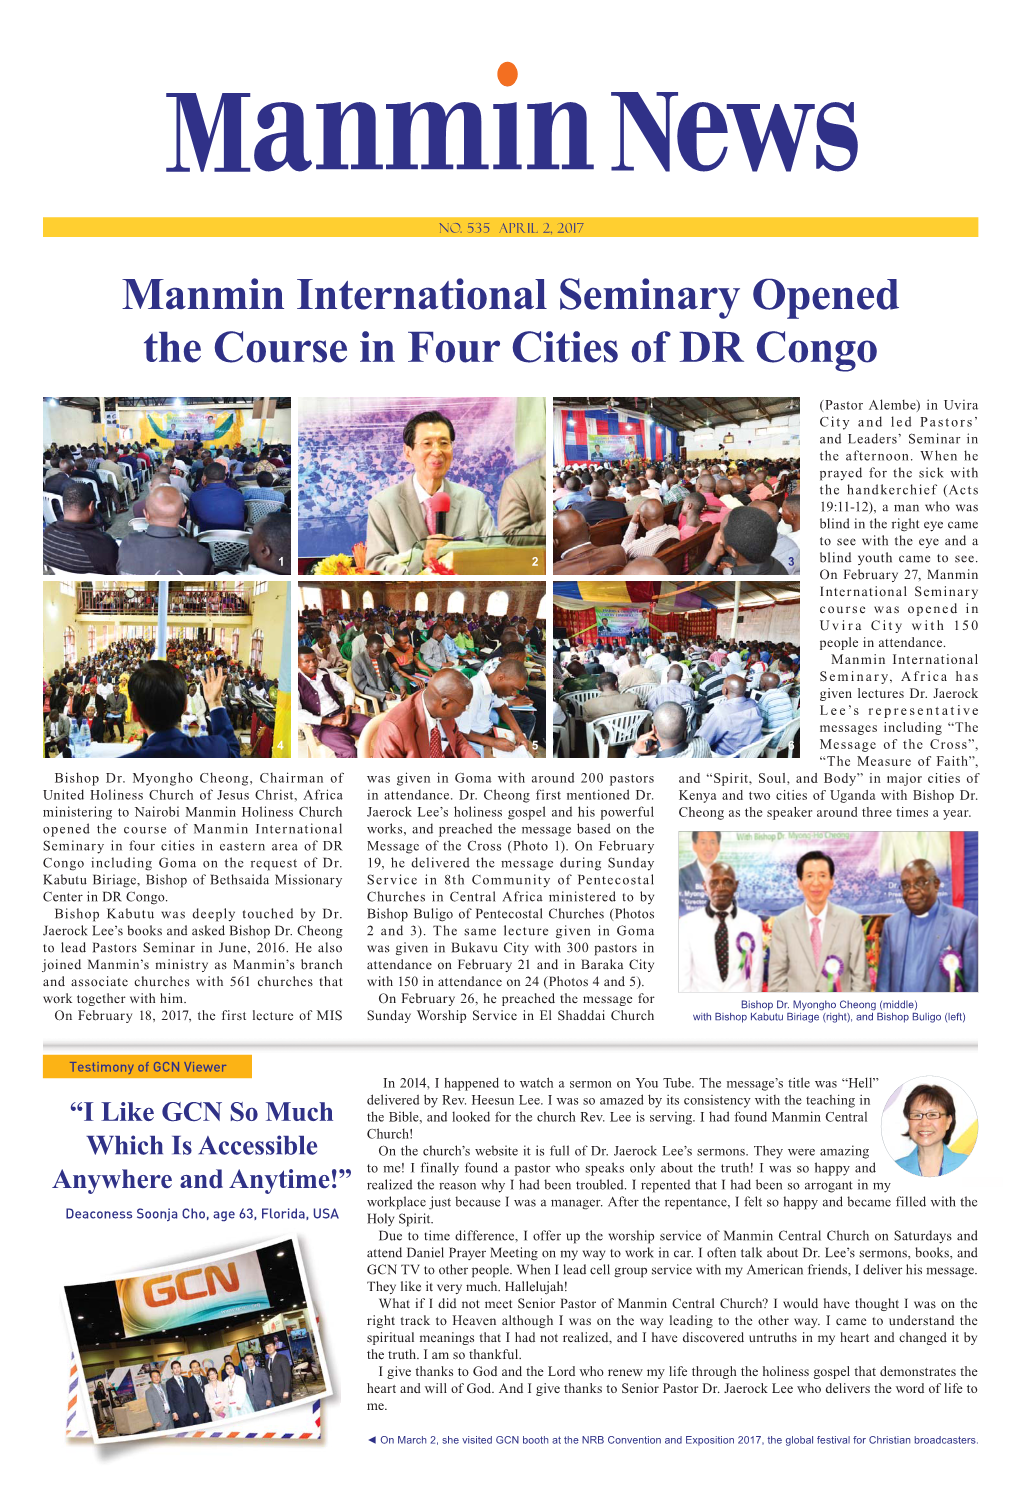 Manmin International Seminary Opened the Course in Four Cities of DR Congo